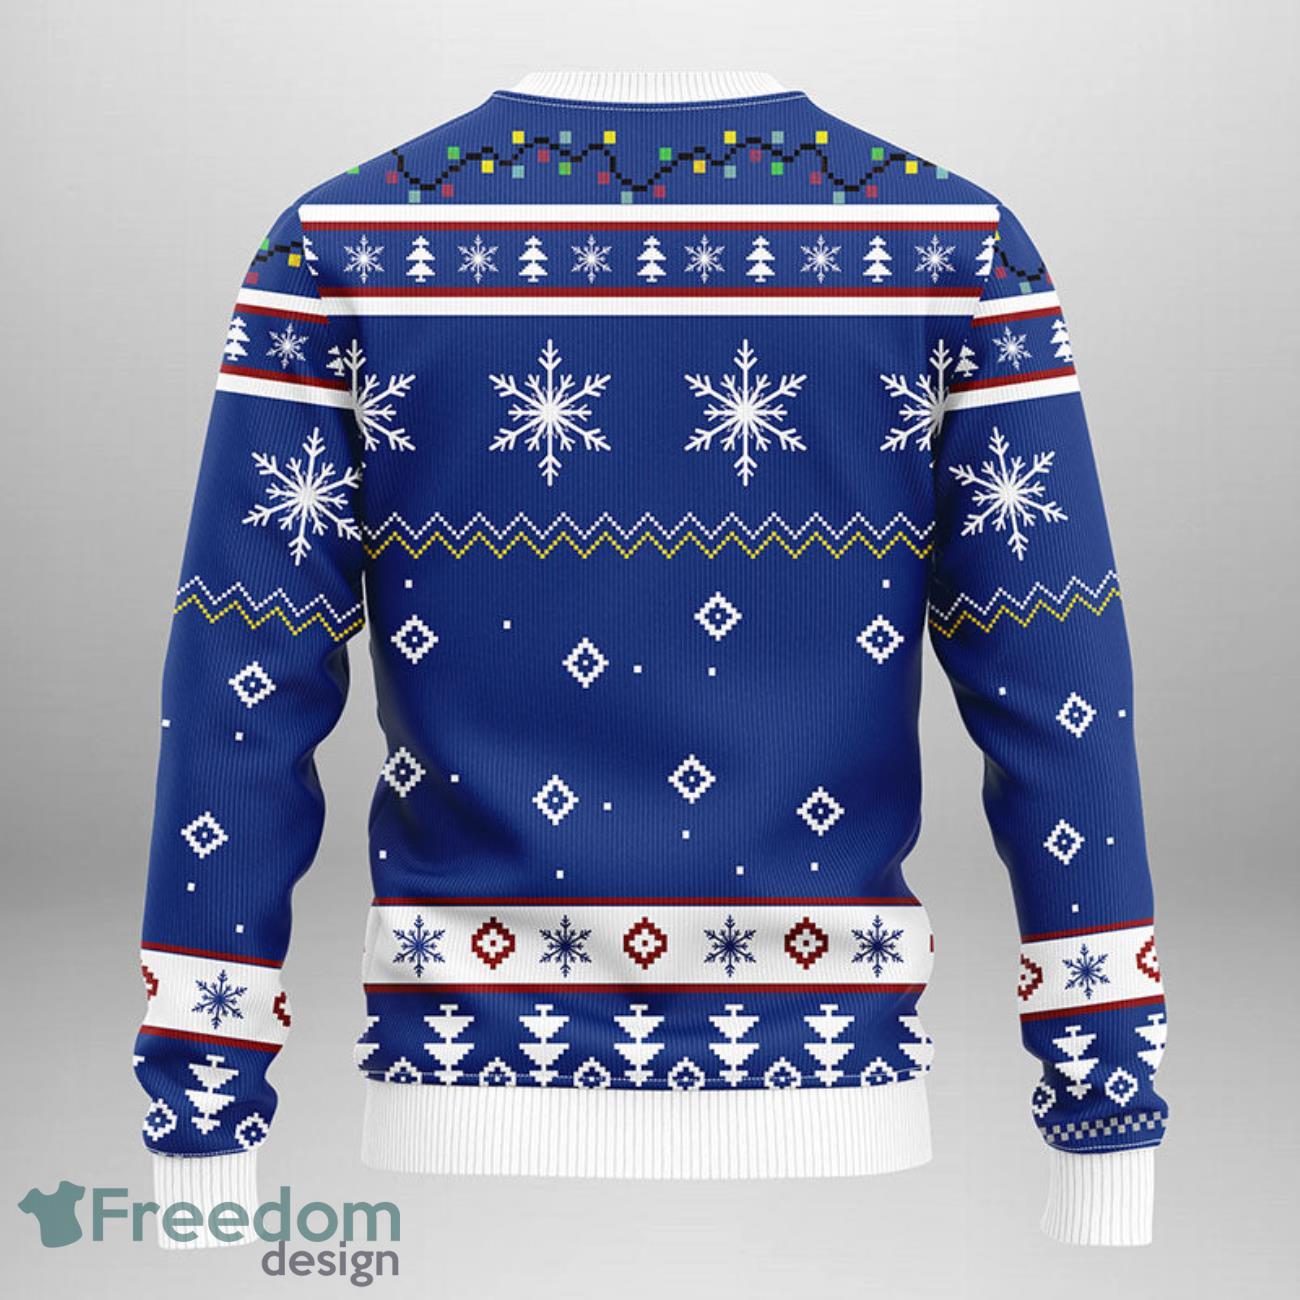 Dodgers Christmas Sweater Triangle Pattern Los Angeles Dodgers